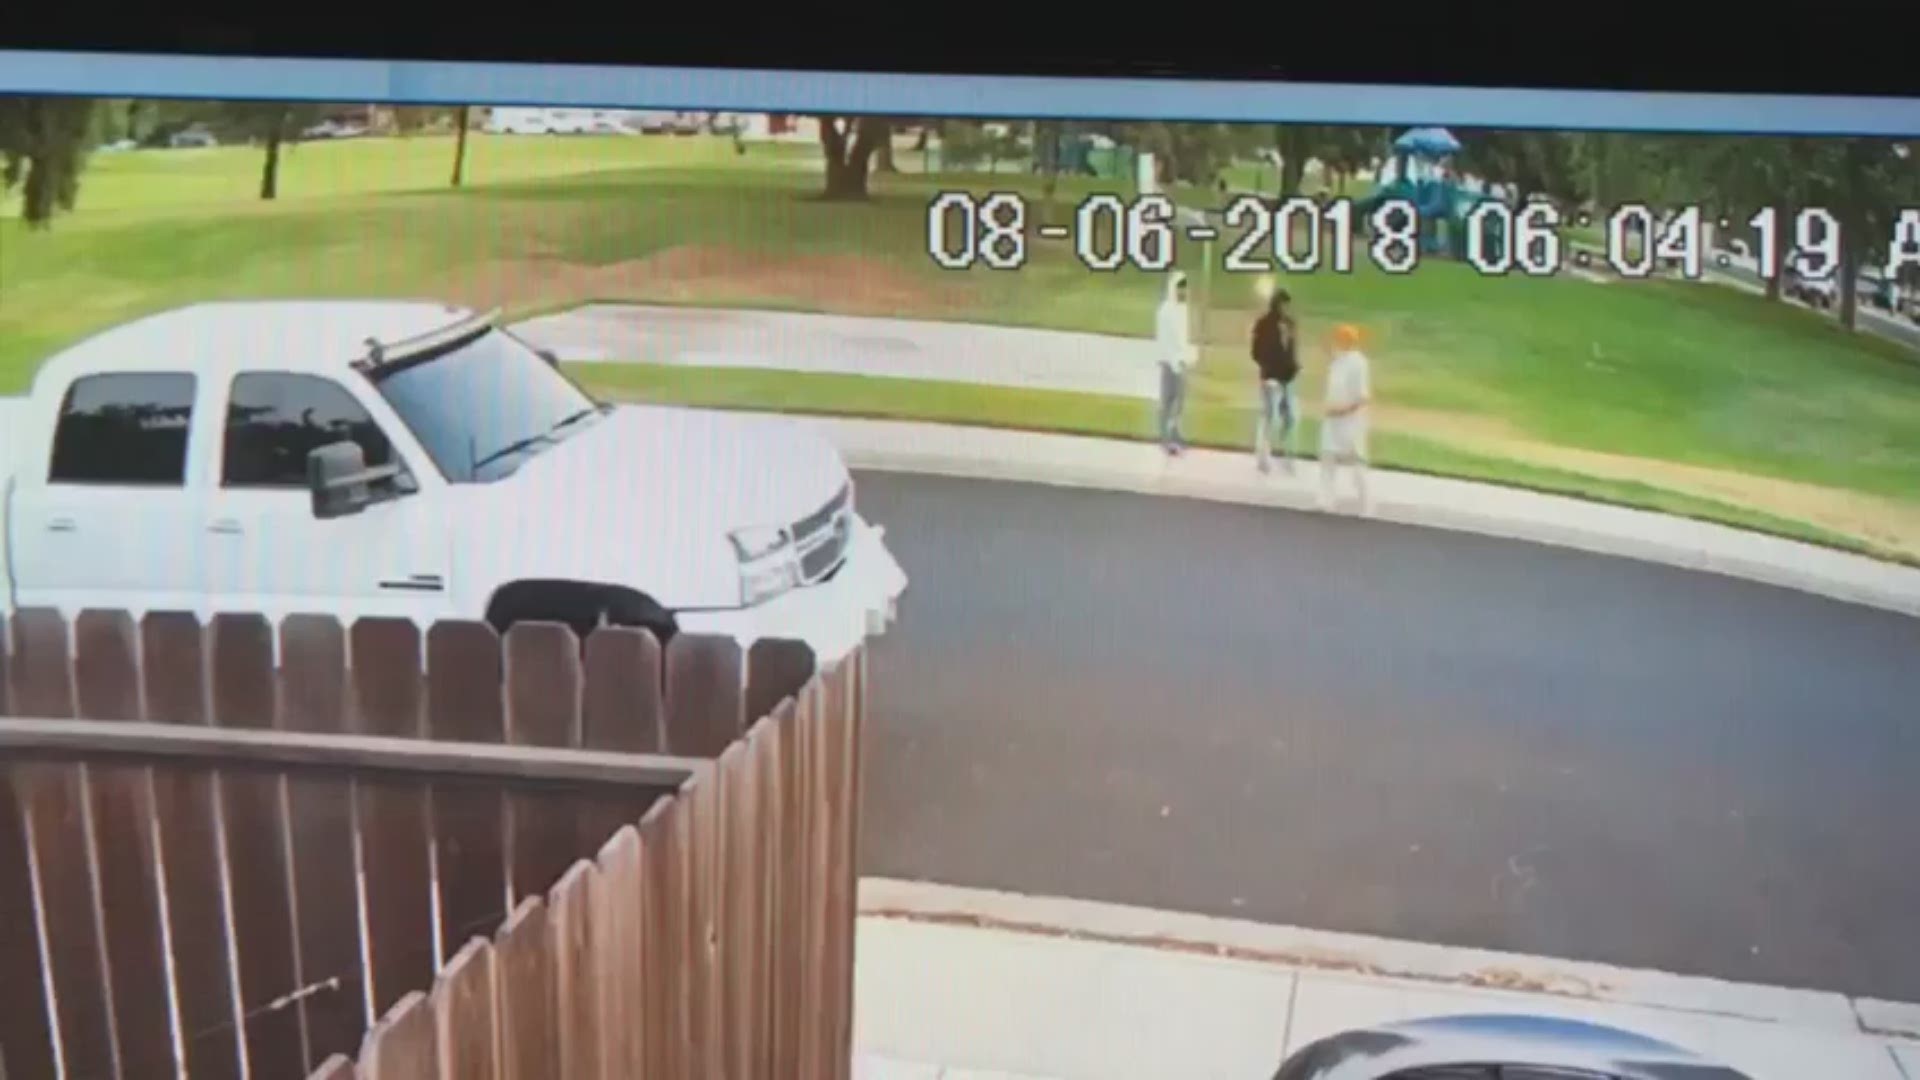 Manteca police are investigating an attempted robbery of an elderly Sikh man after the incident was caught on video Monday. (WARNING: Violent confrontation is shown in the video, courtesy of Manteca PD).